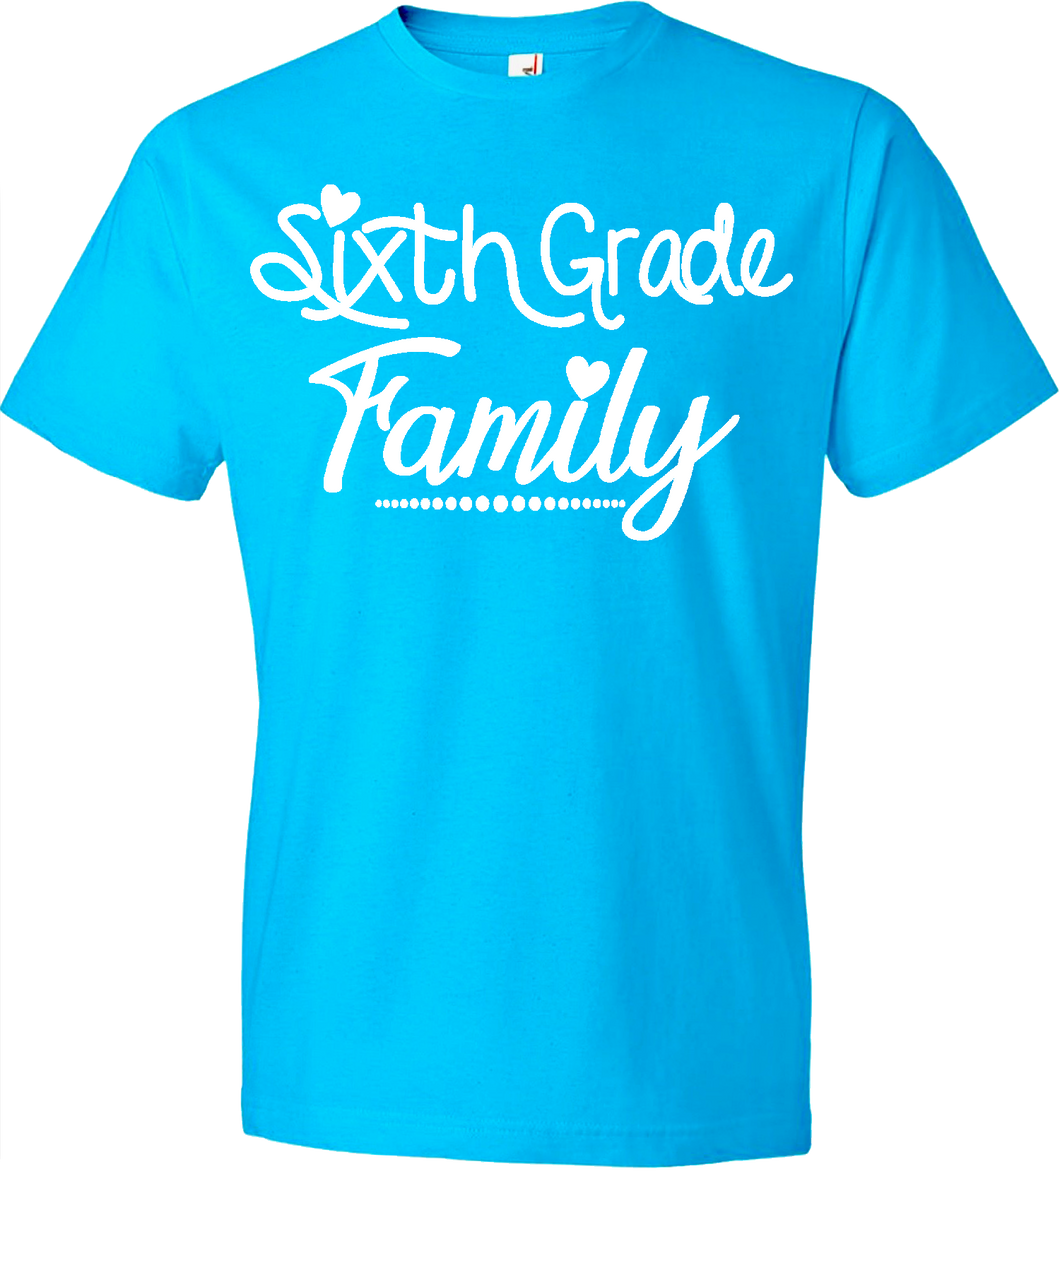 6th Grade Family Grade Level Tee (ONLY Size Small, XL, 2X)